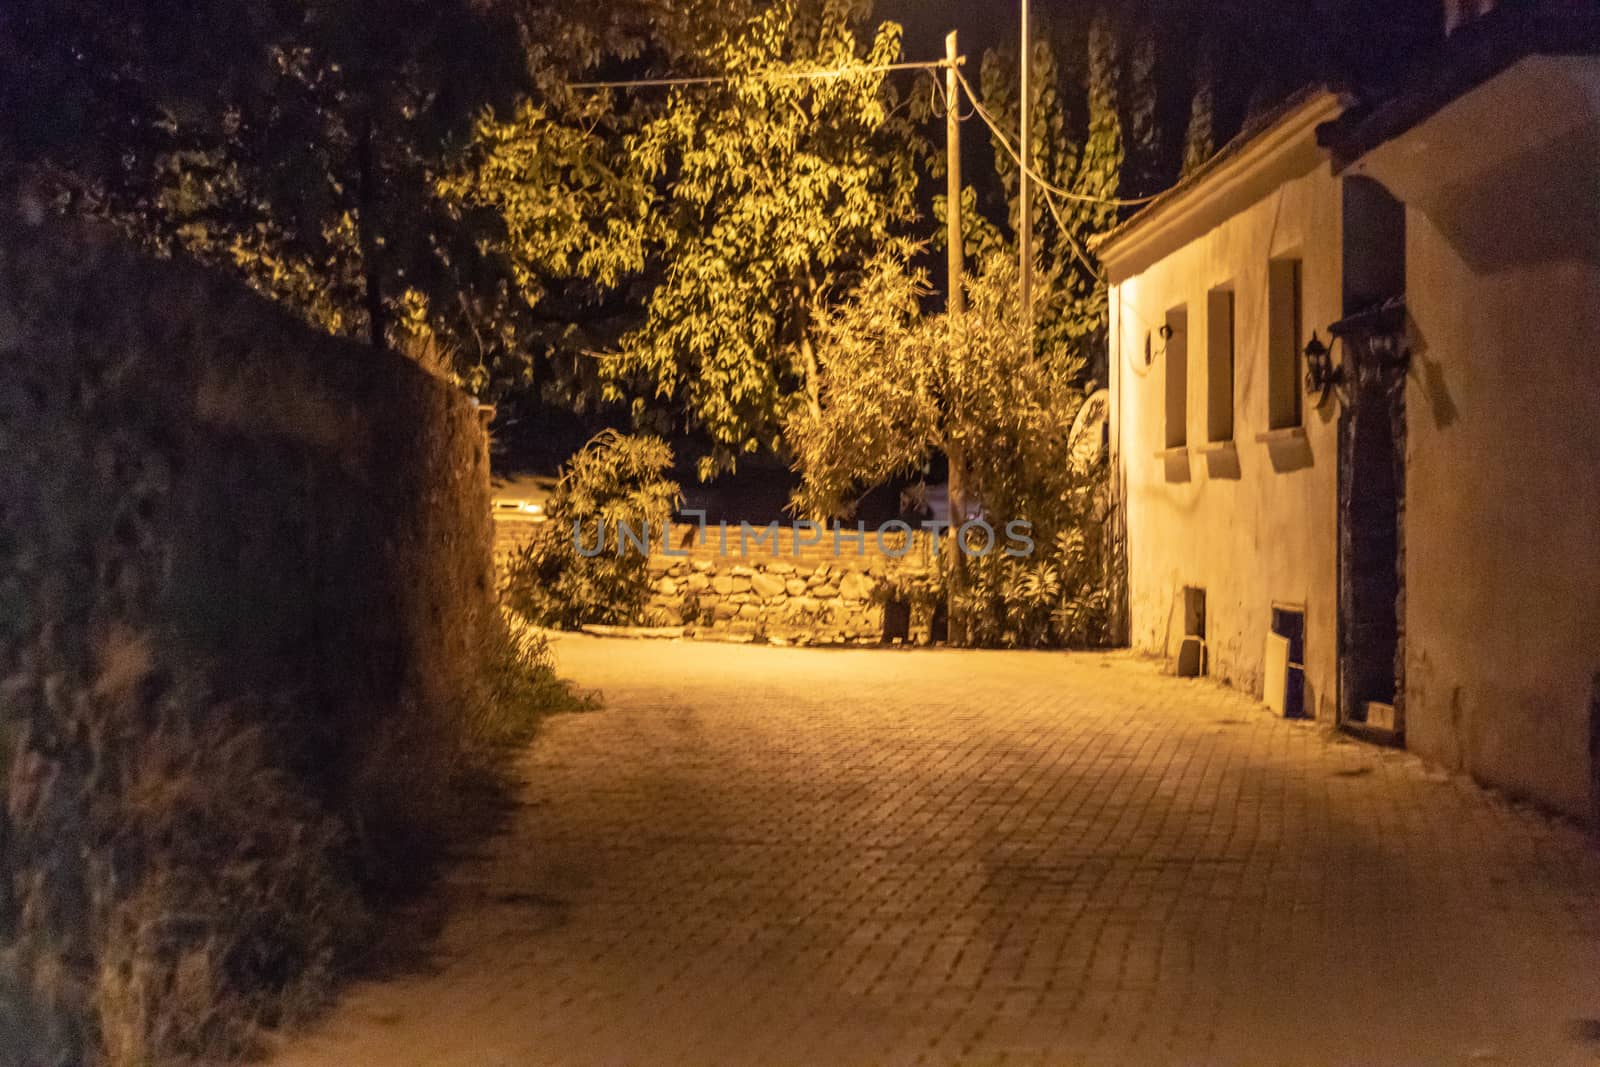 a very well composed night shoot from an urban street - there is street light at village. photo has taken izmir/turkey.